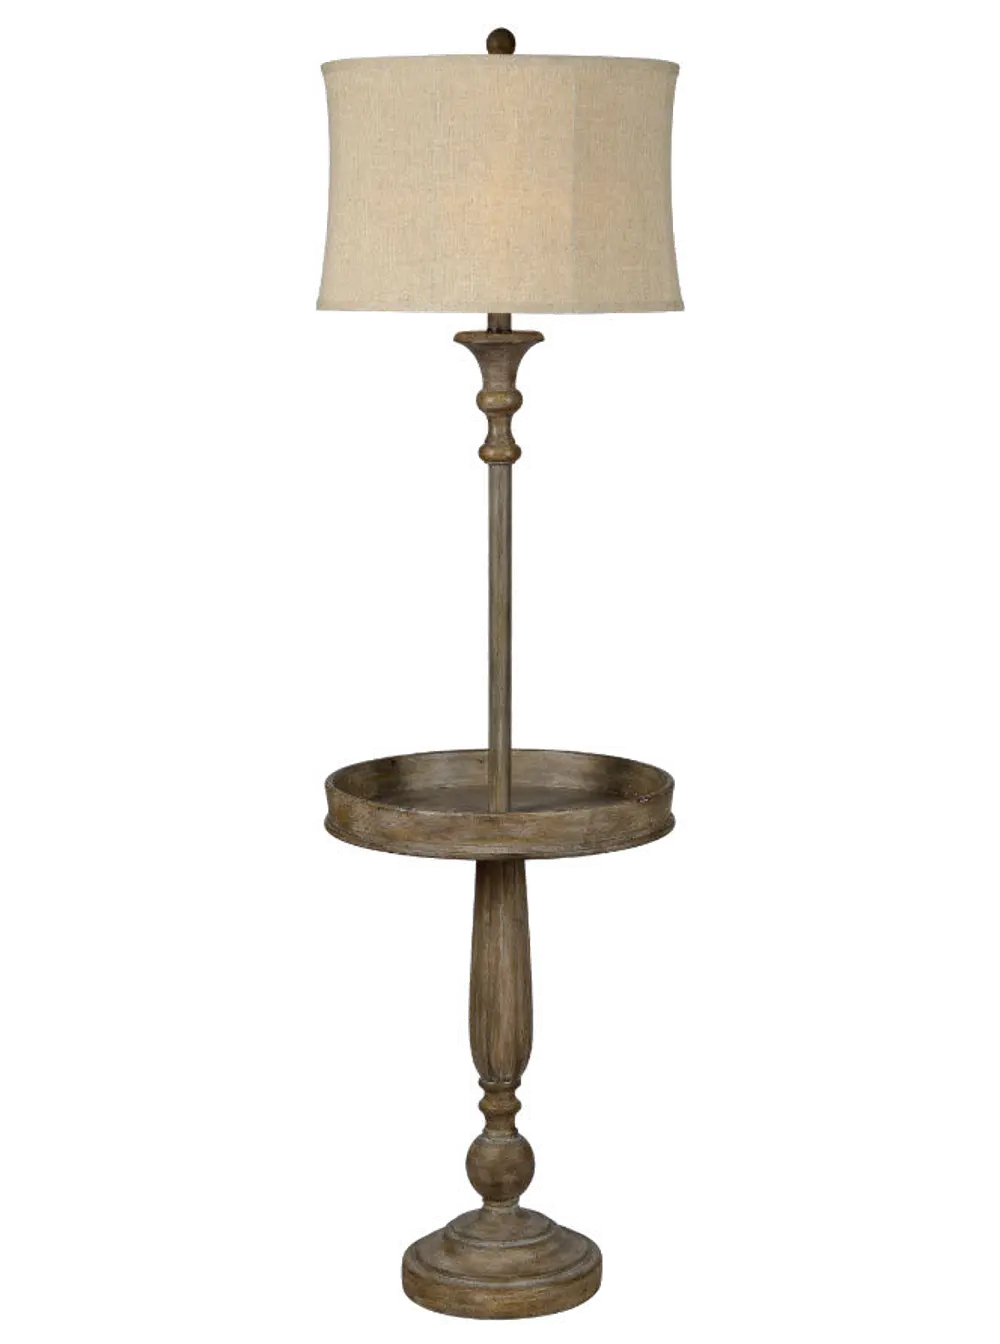 Distressed Wood-Like Floor Lamp with Tray - Grover-1